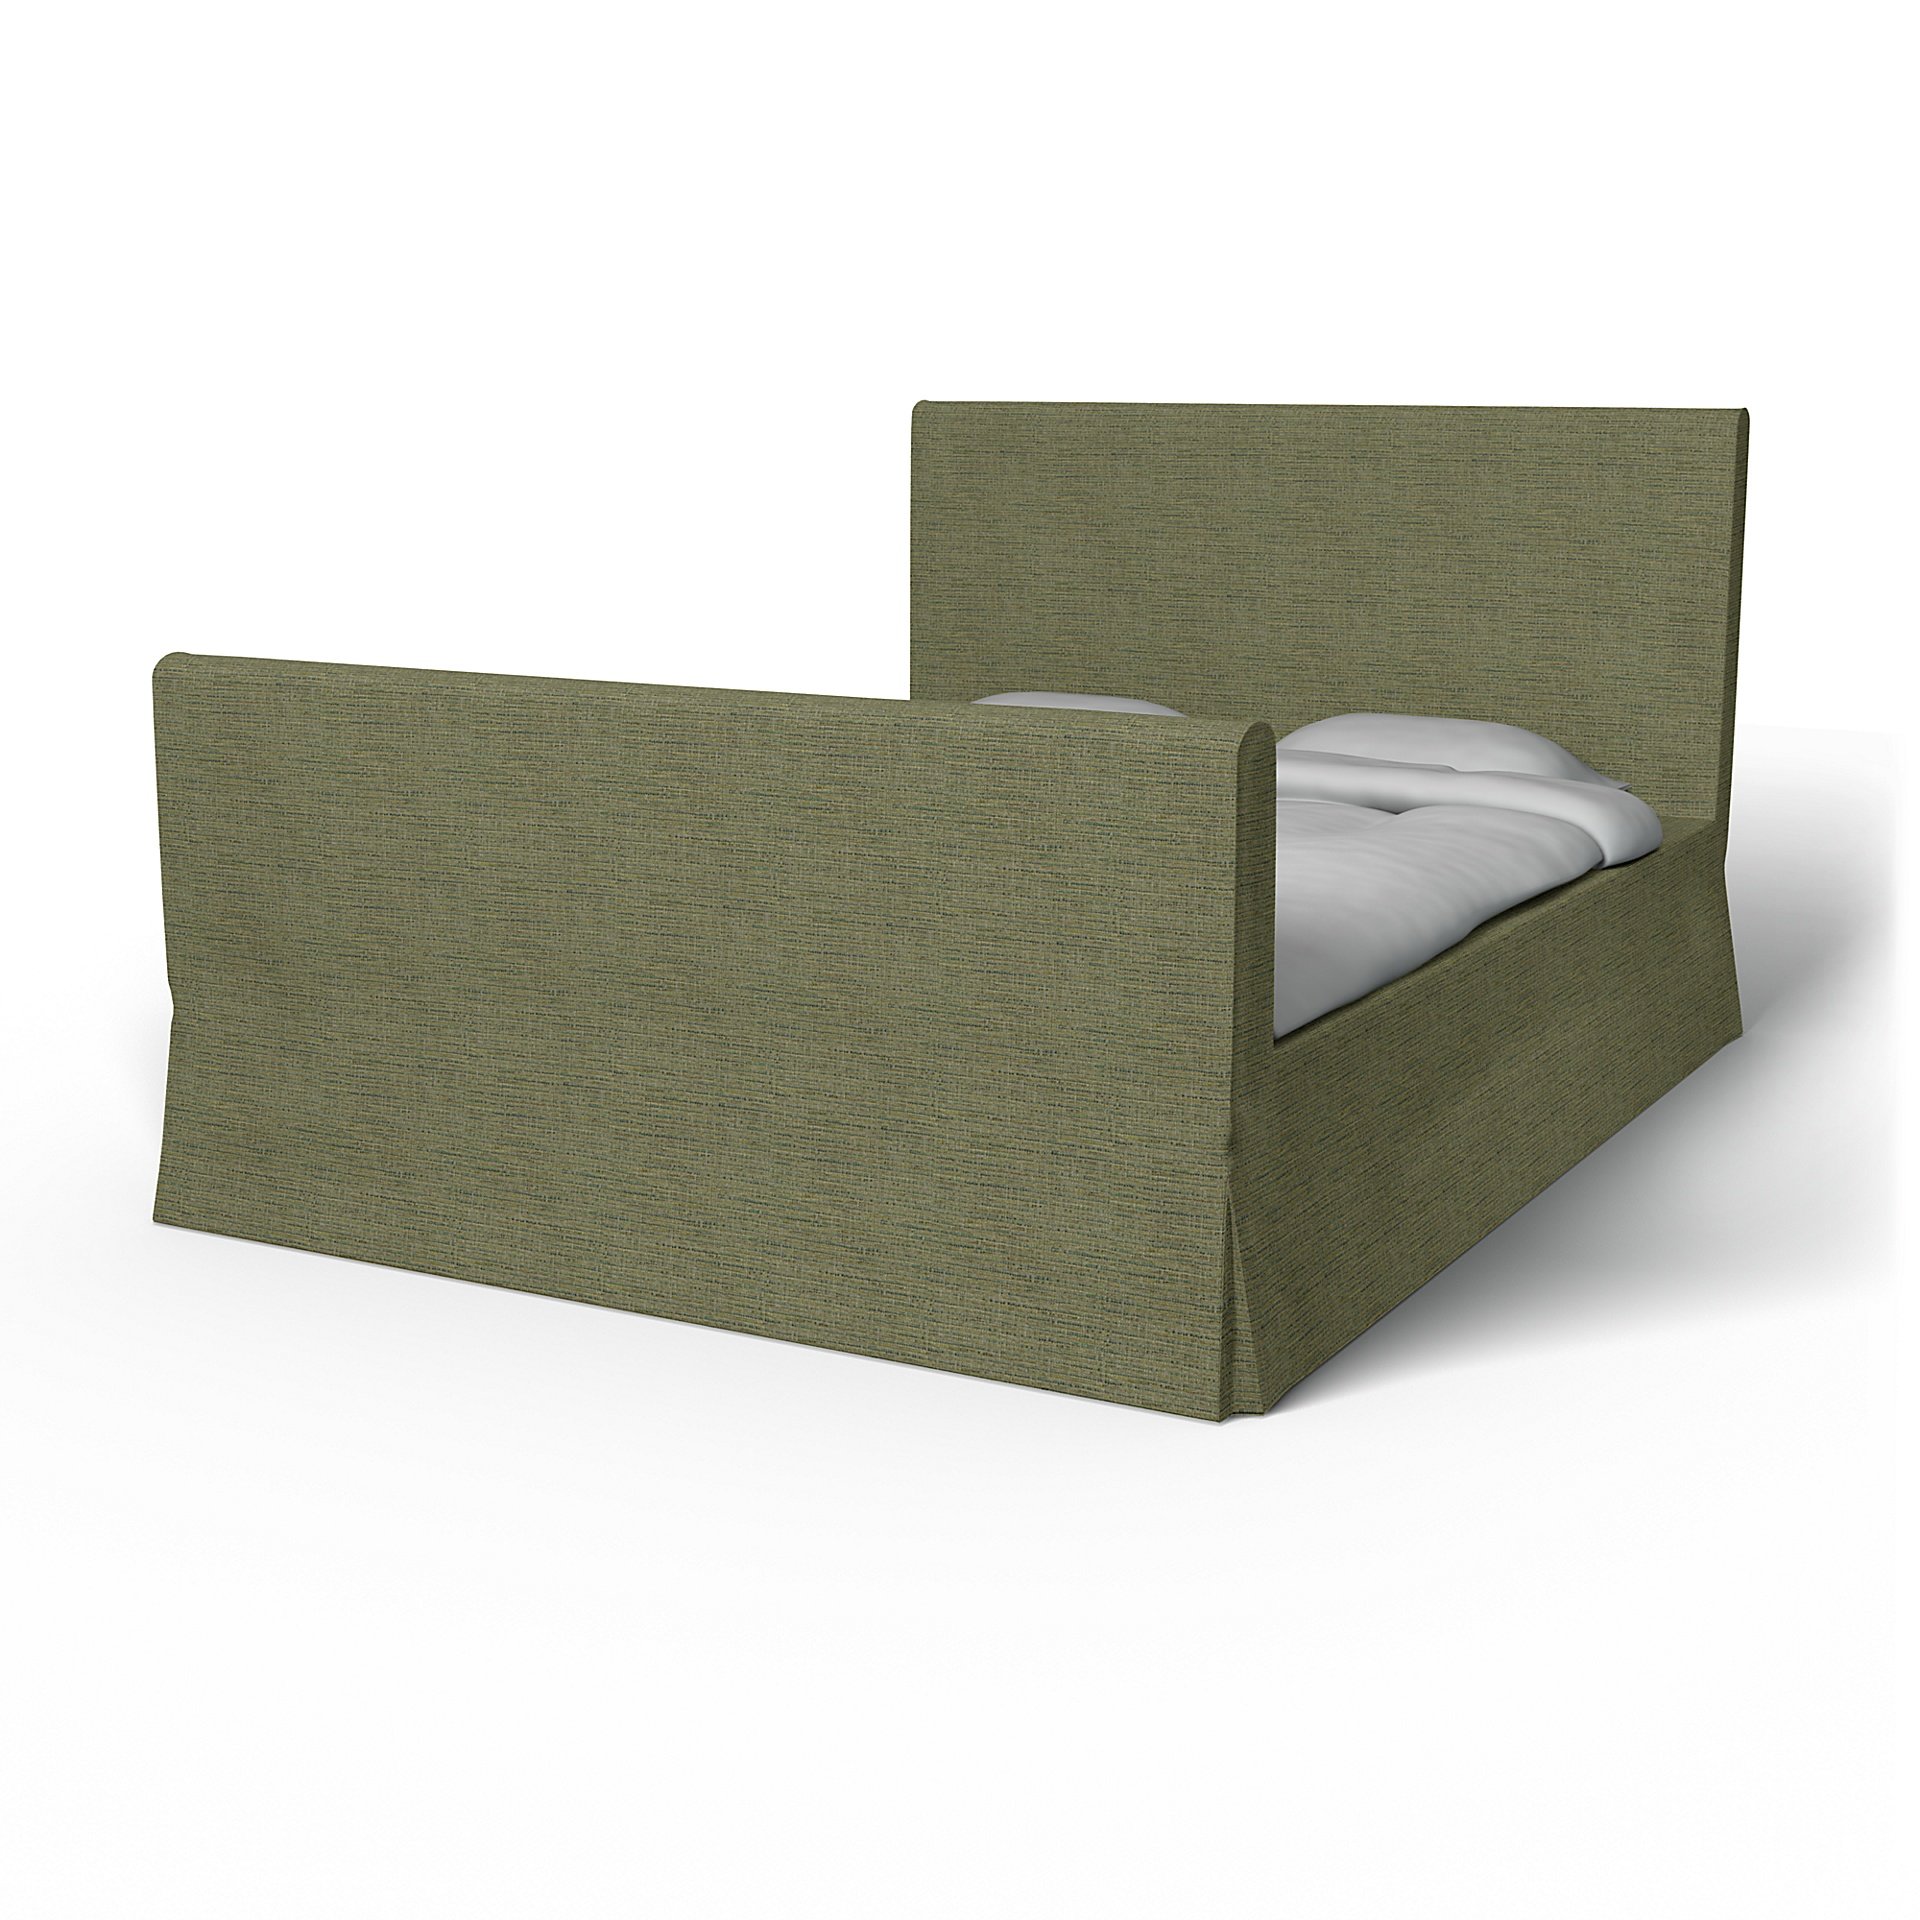 IKEA - Floro Bed Frame Cover, Meadow Green, Boucle & Texture - Bemz